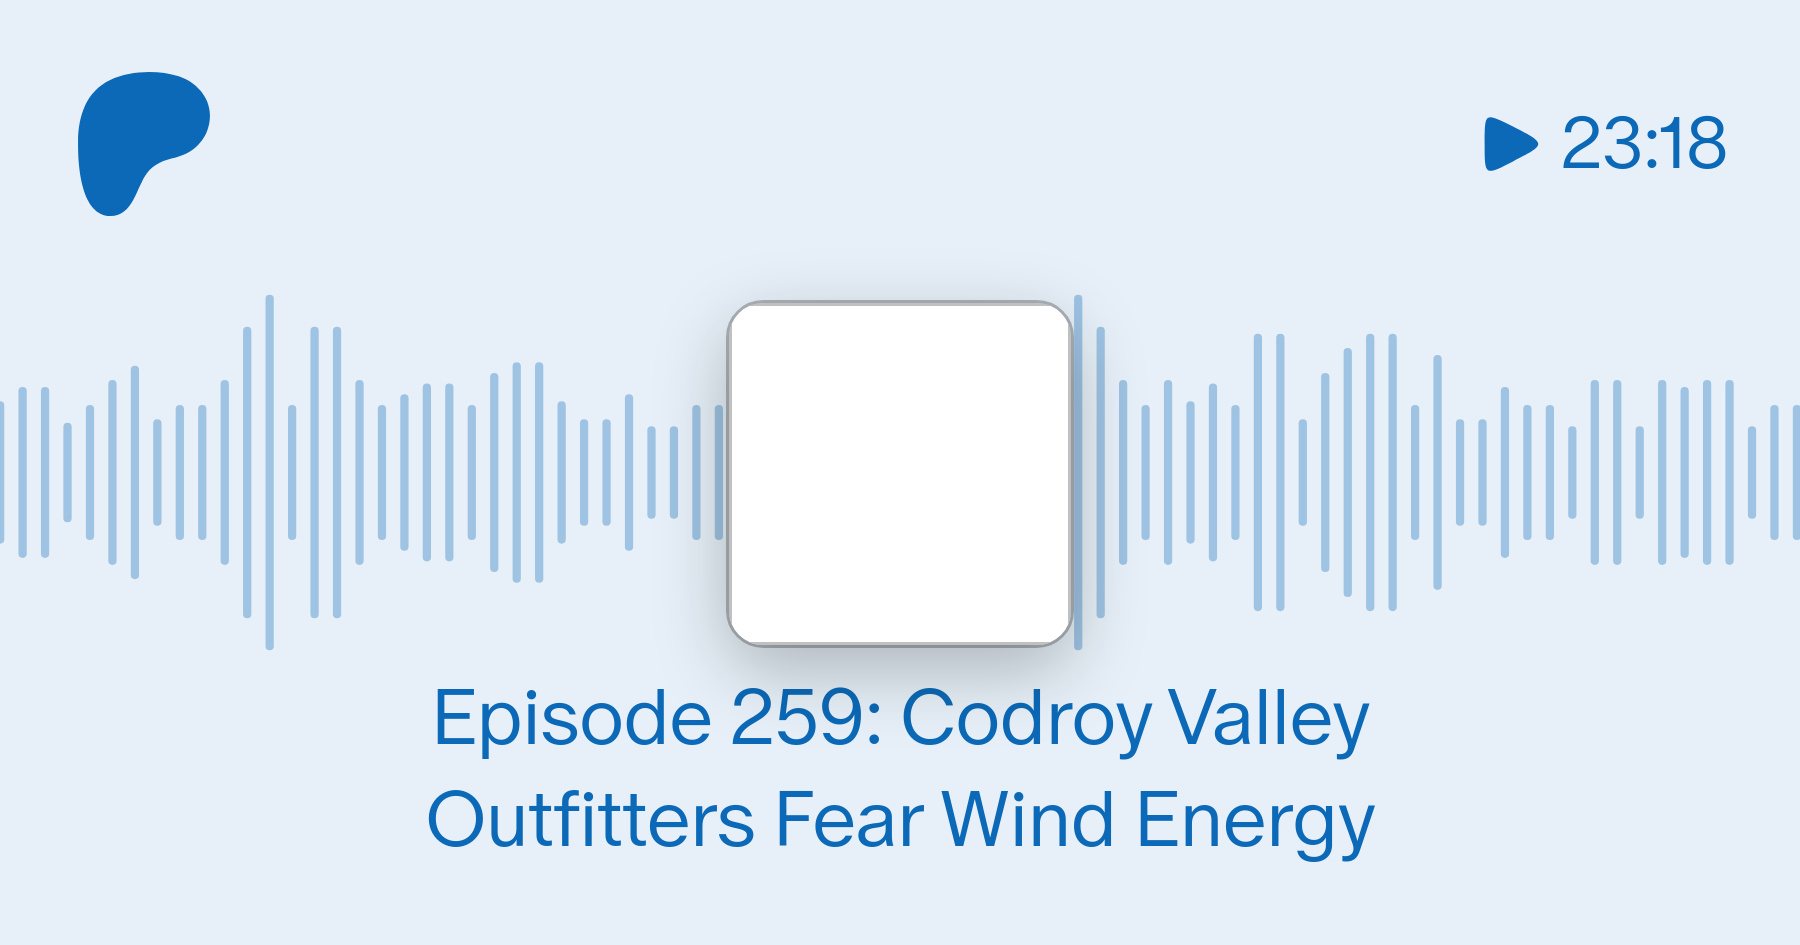 Episode 259: Codroy Valley Outfitters Fear Wind Energy